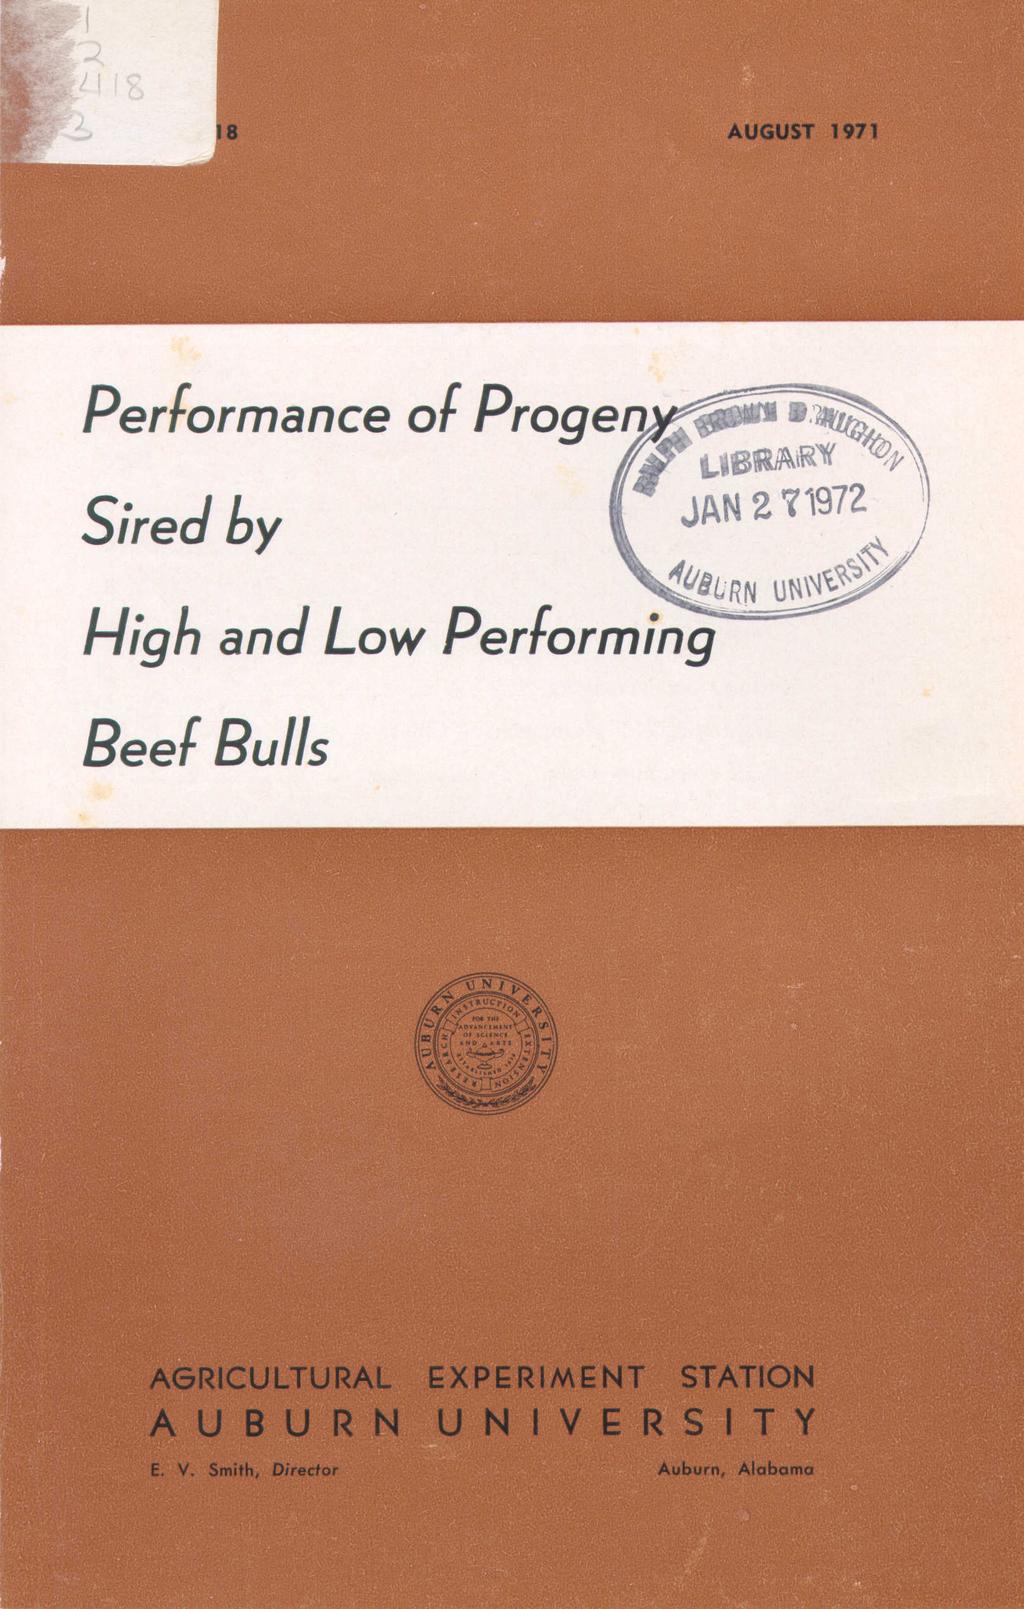 AUGUST 1971 Performance of Progeny Sired by JAN2 71 97 2 High and Low Per forming Beef Bulls